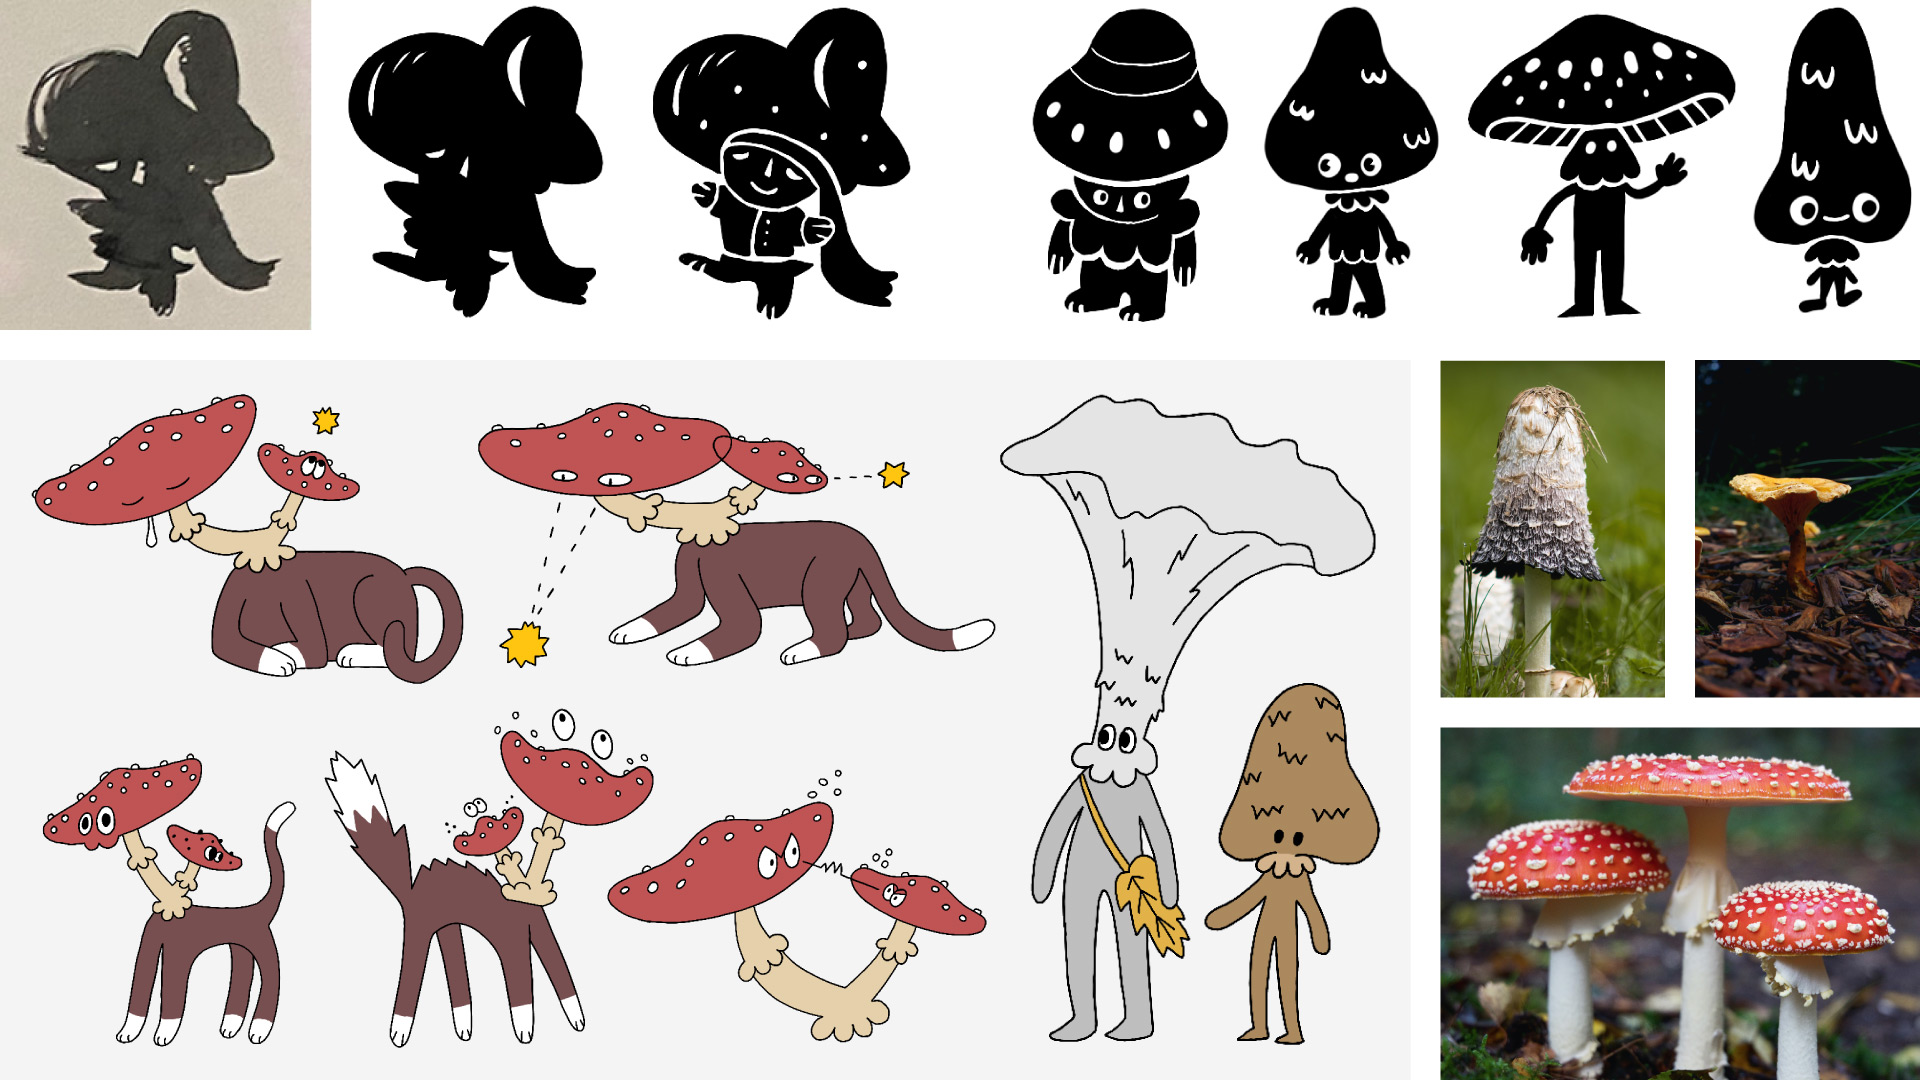 Mushroom character iterations, poses, and photographic references.